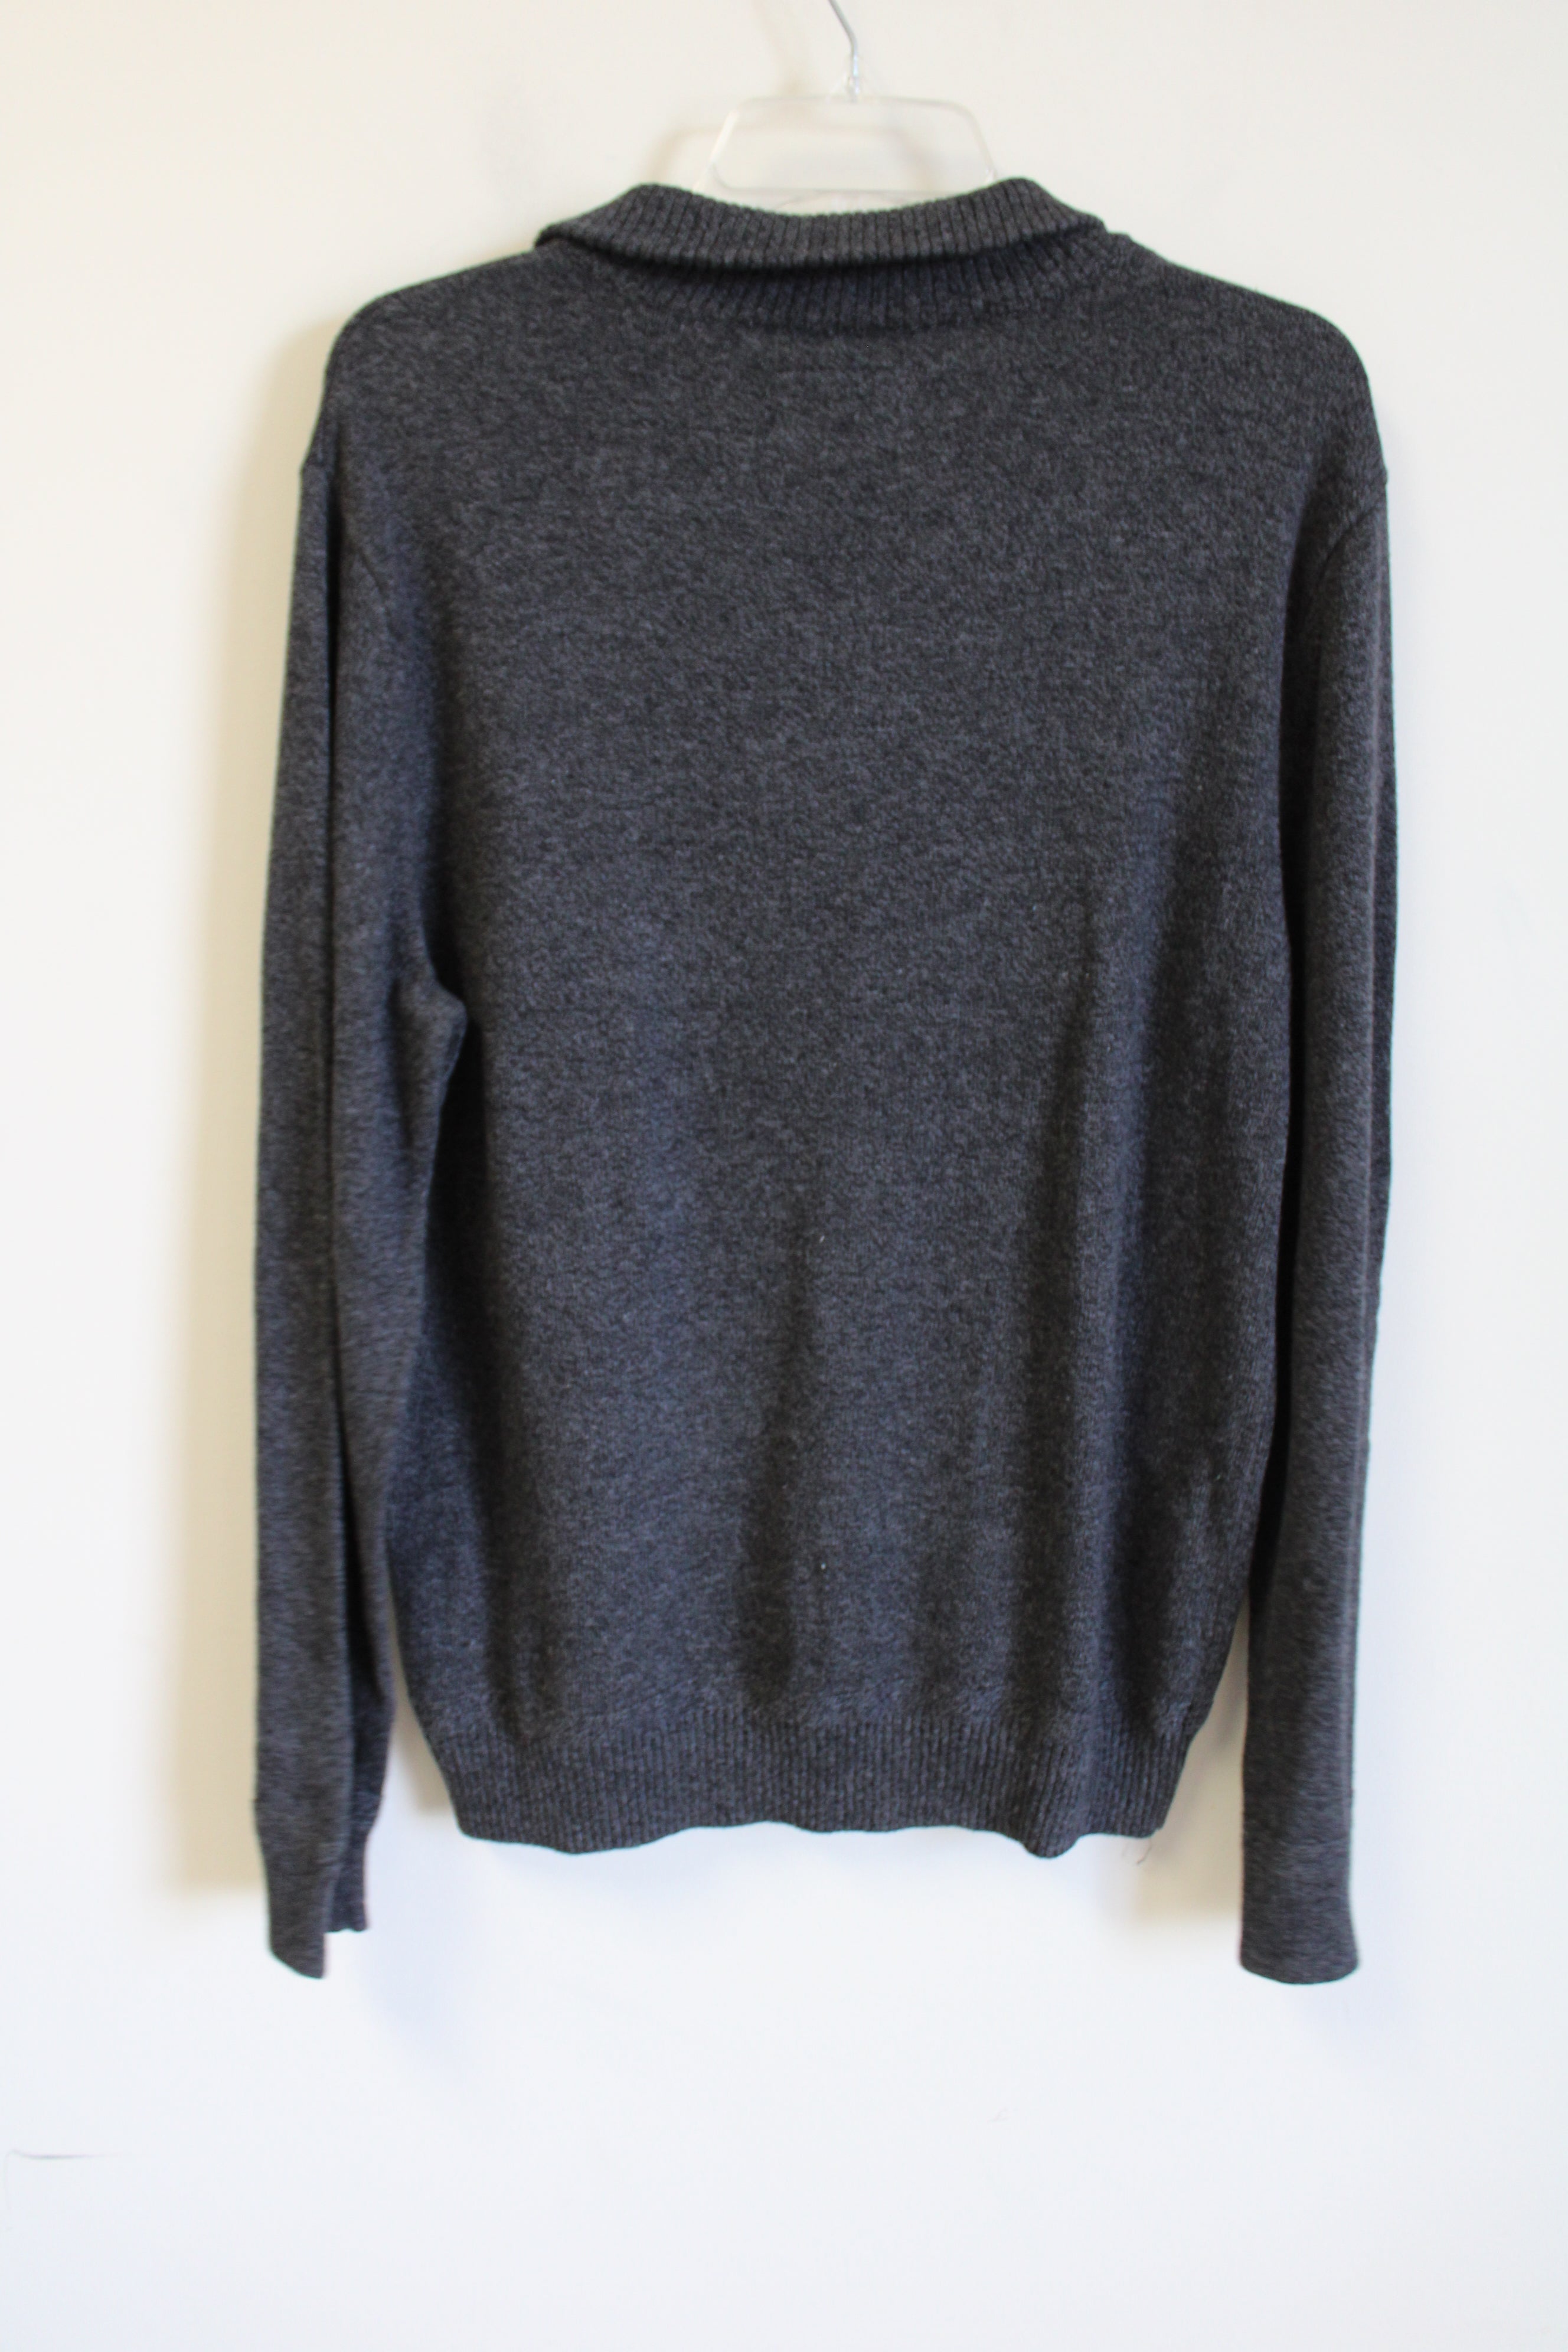 American Eagle Classic Fit Gray Knit Collared Sweater | L